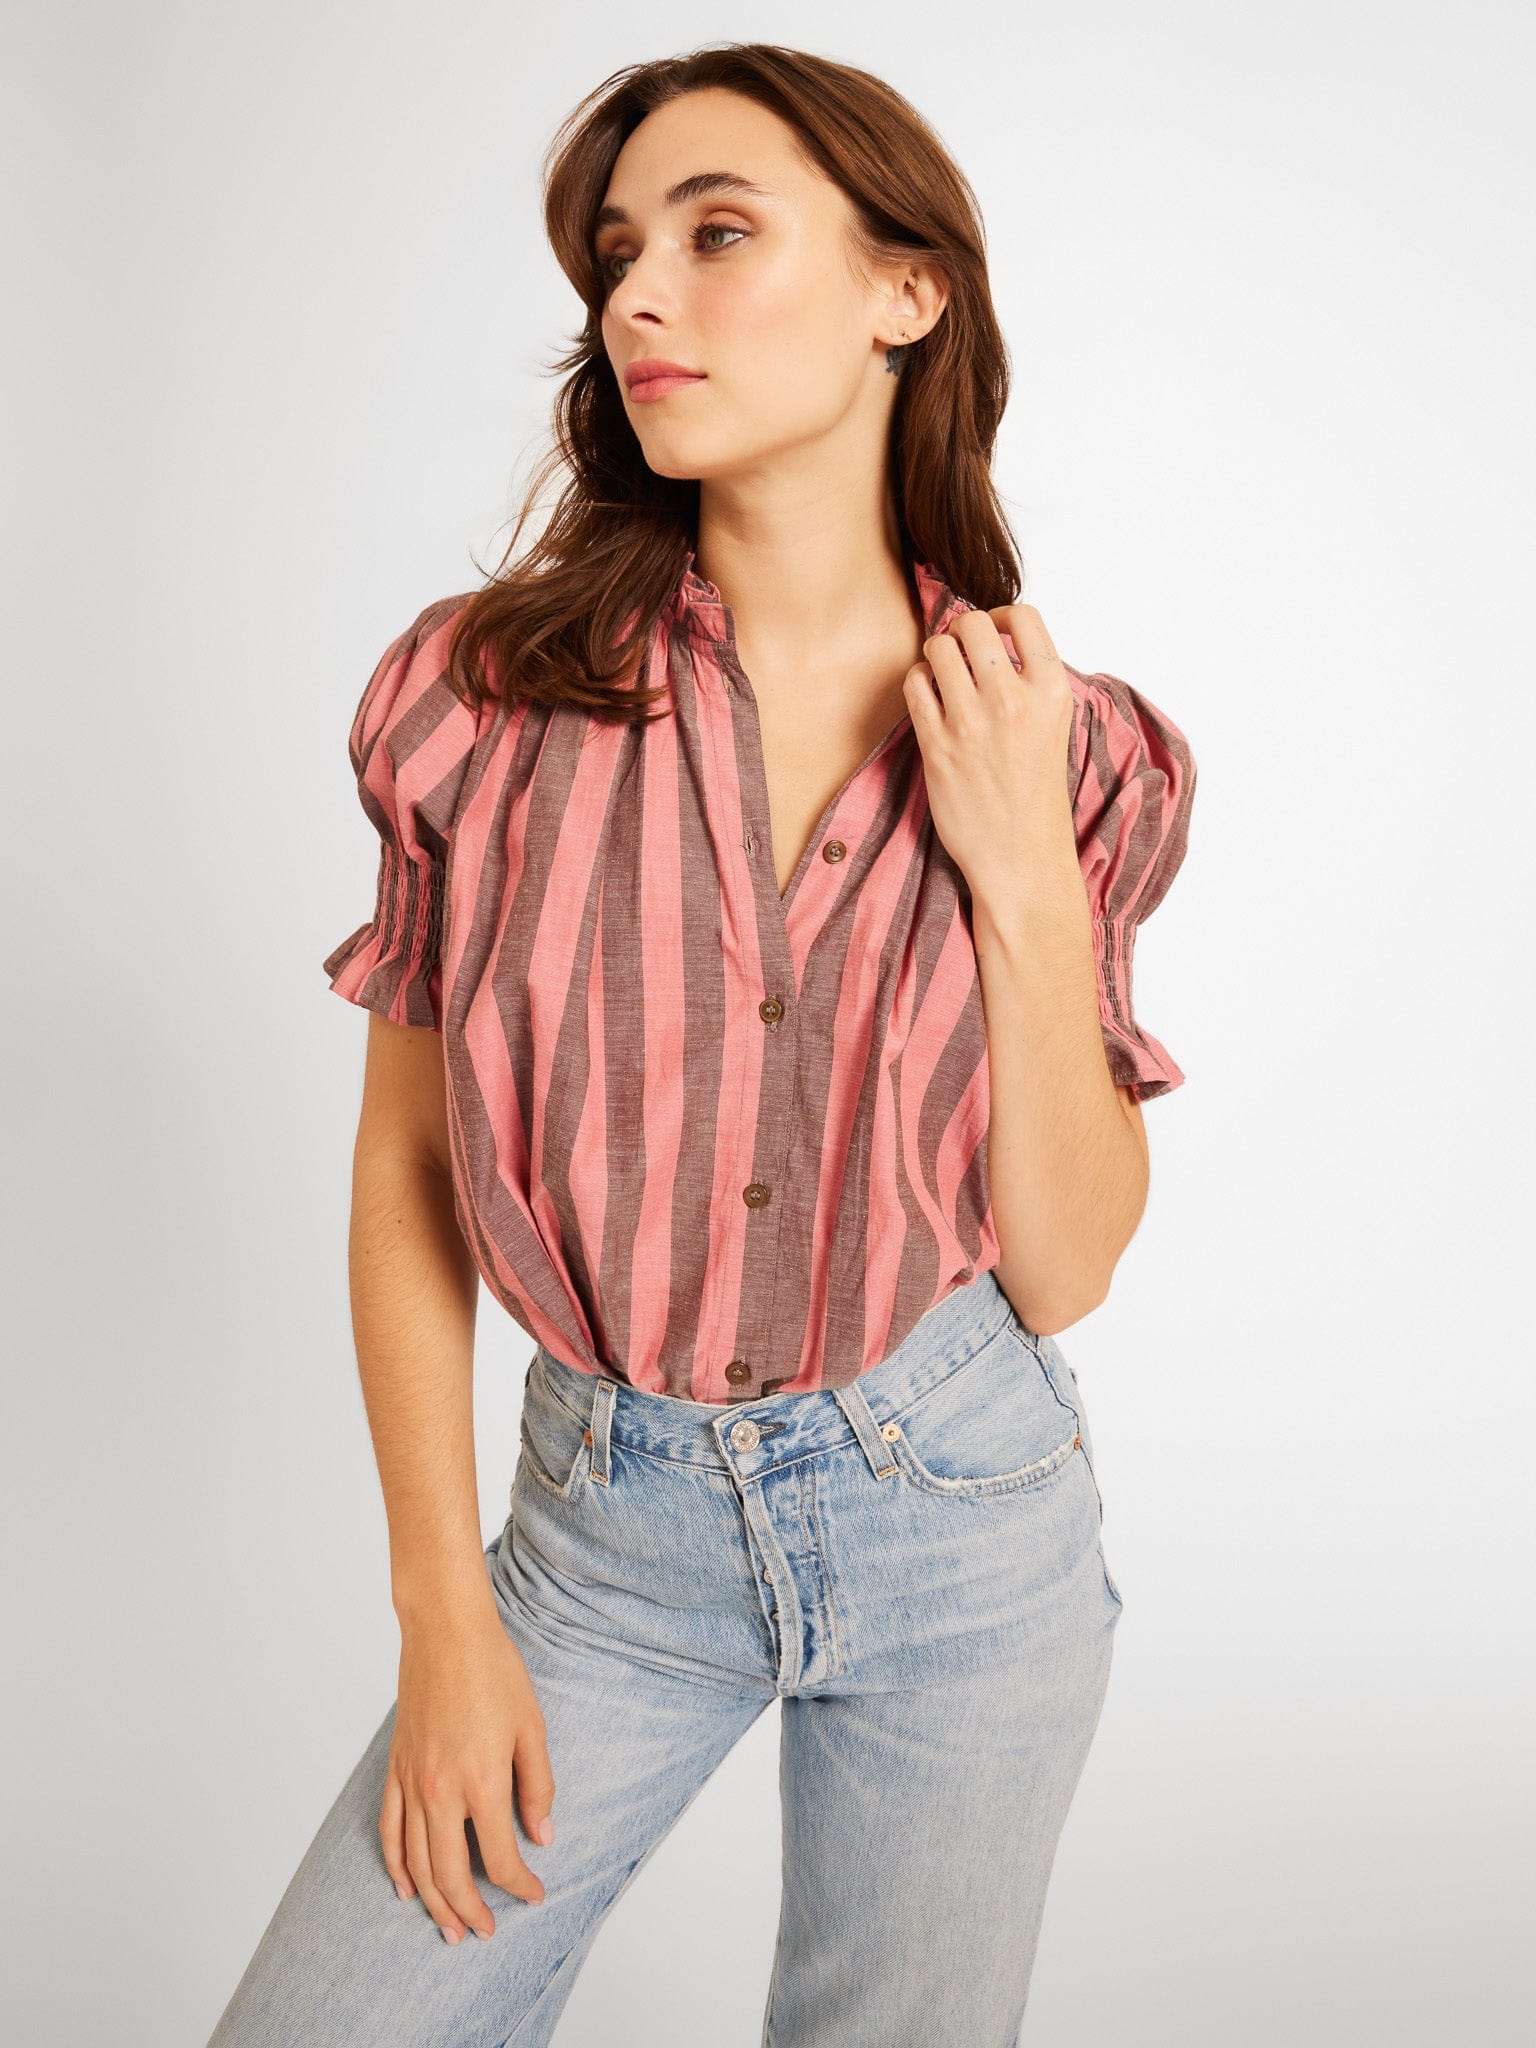 MILLE Clothing Marnie Top in Rosewood & Sable